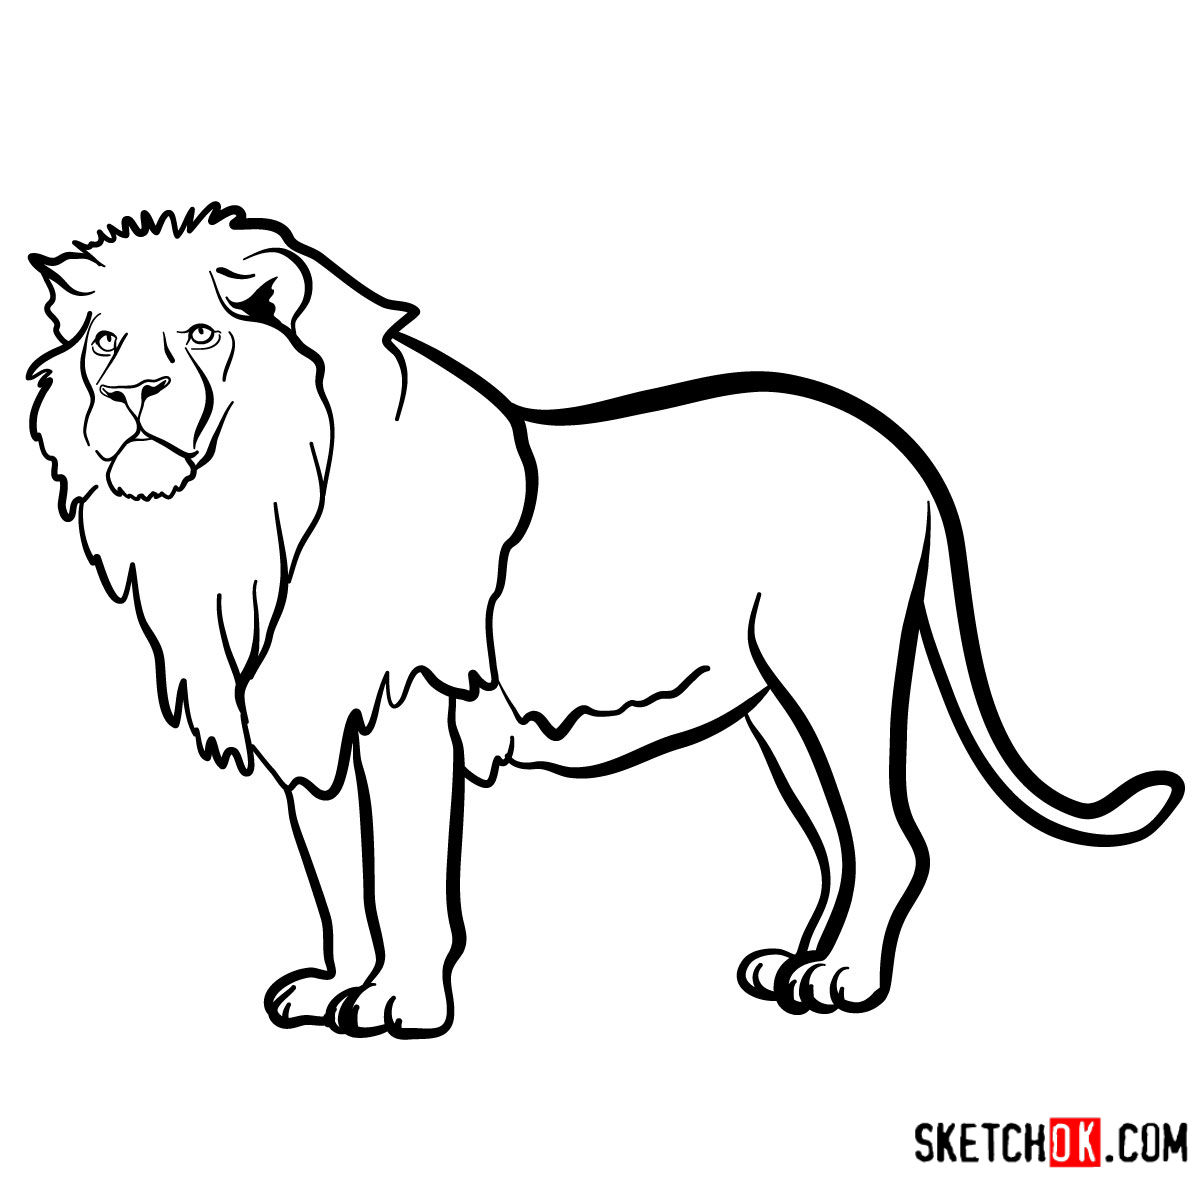 How to draw Wild Animals - Sketchok easy drawing guides